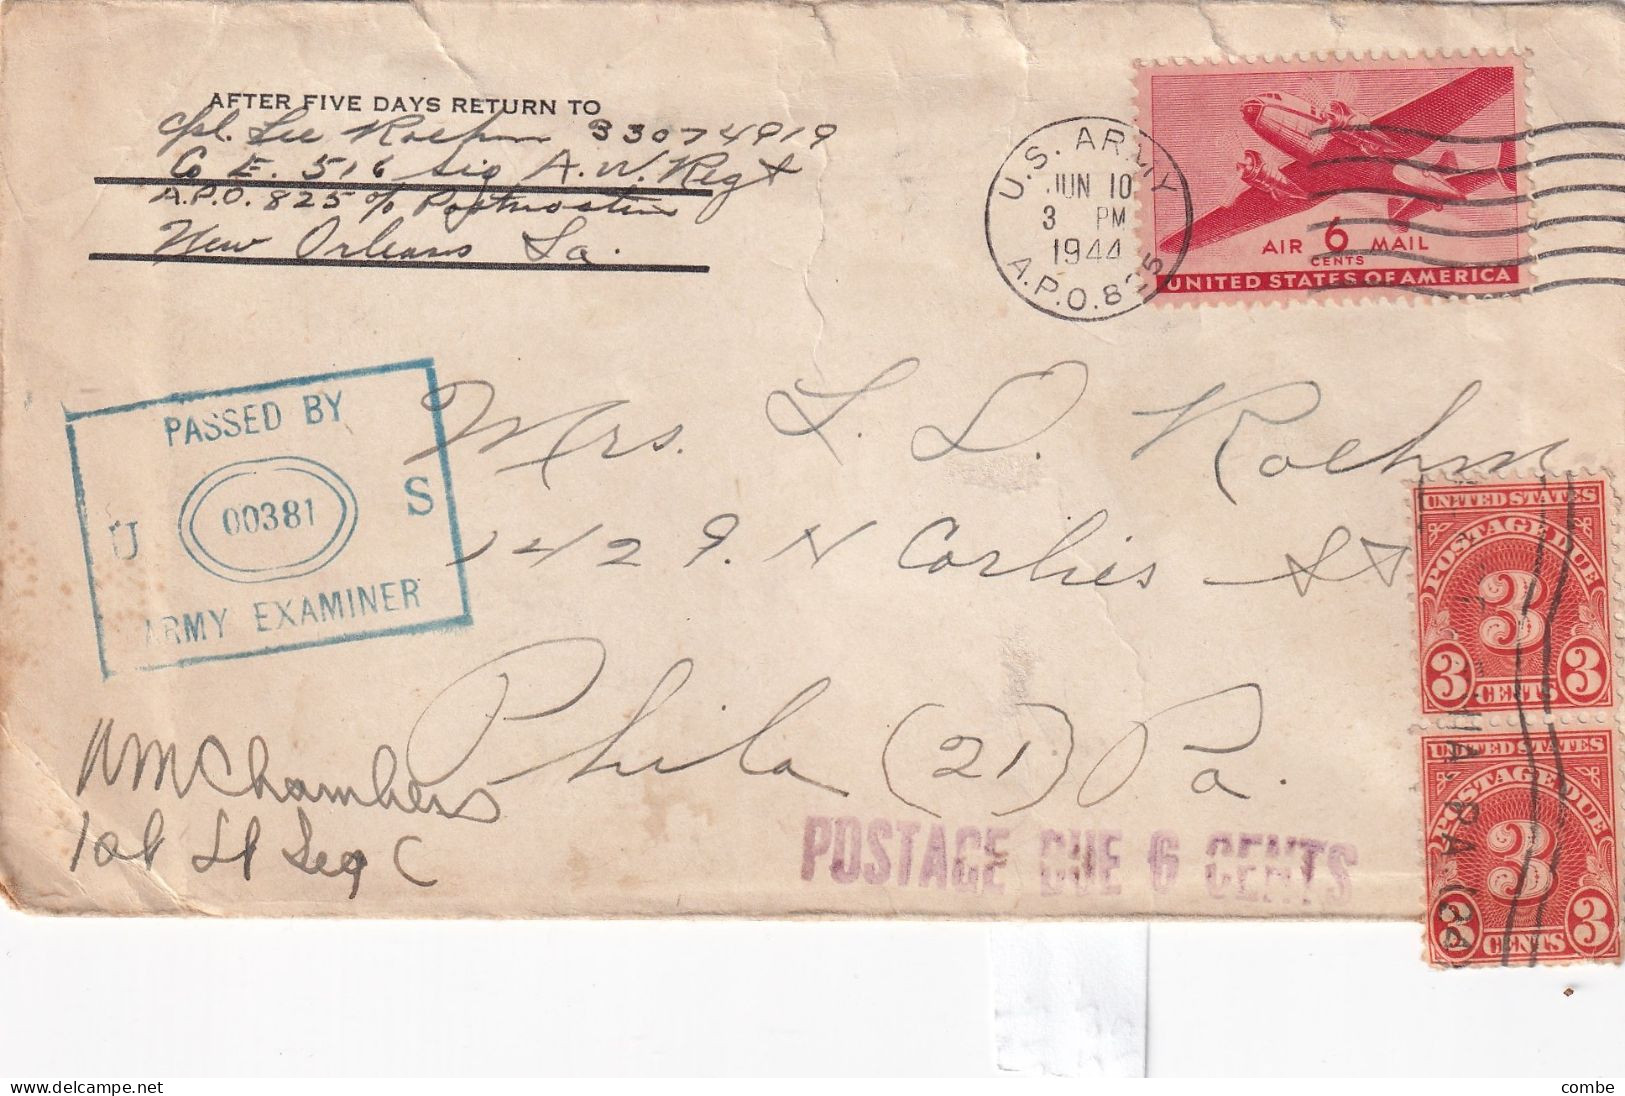 COVER US. 3 JUN 1944. APO 825. ALBROOK FIELD. CANAL ZONE. TO PHILA. PASSED BY EXAMINER. POSTAGE DUE 6 CENTS - Brieven En Documenten